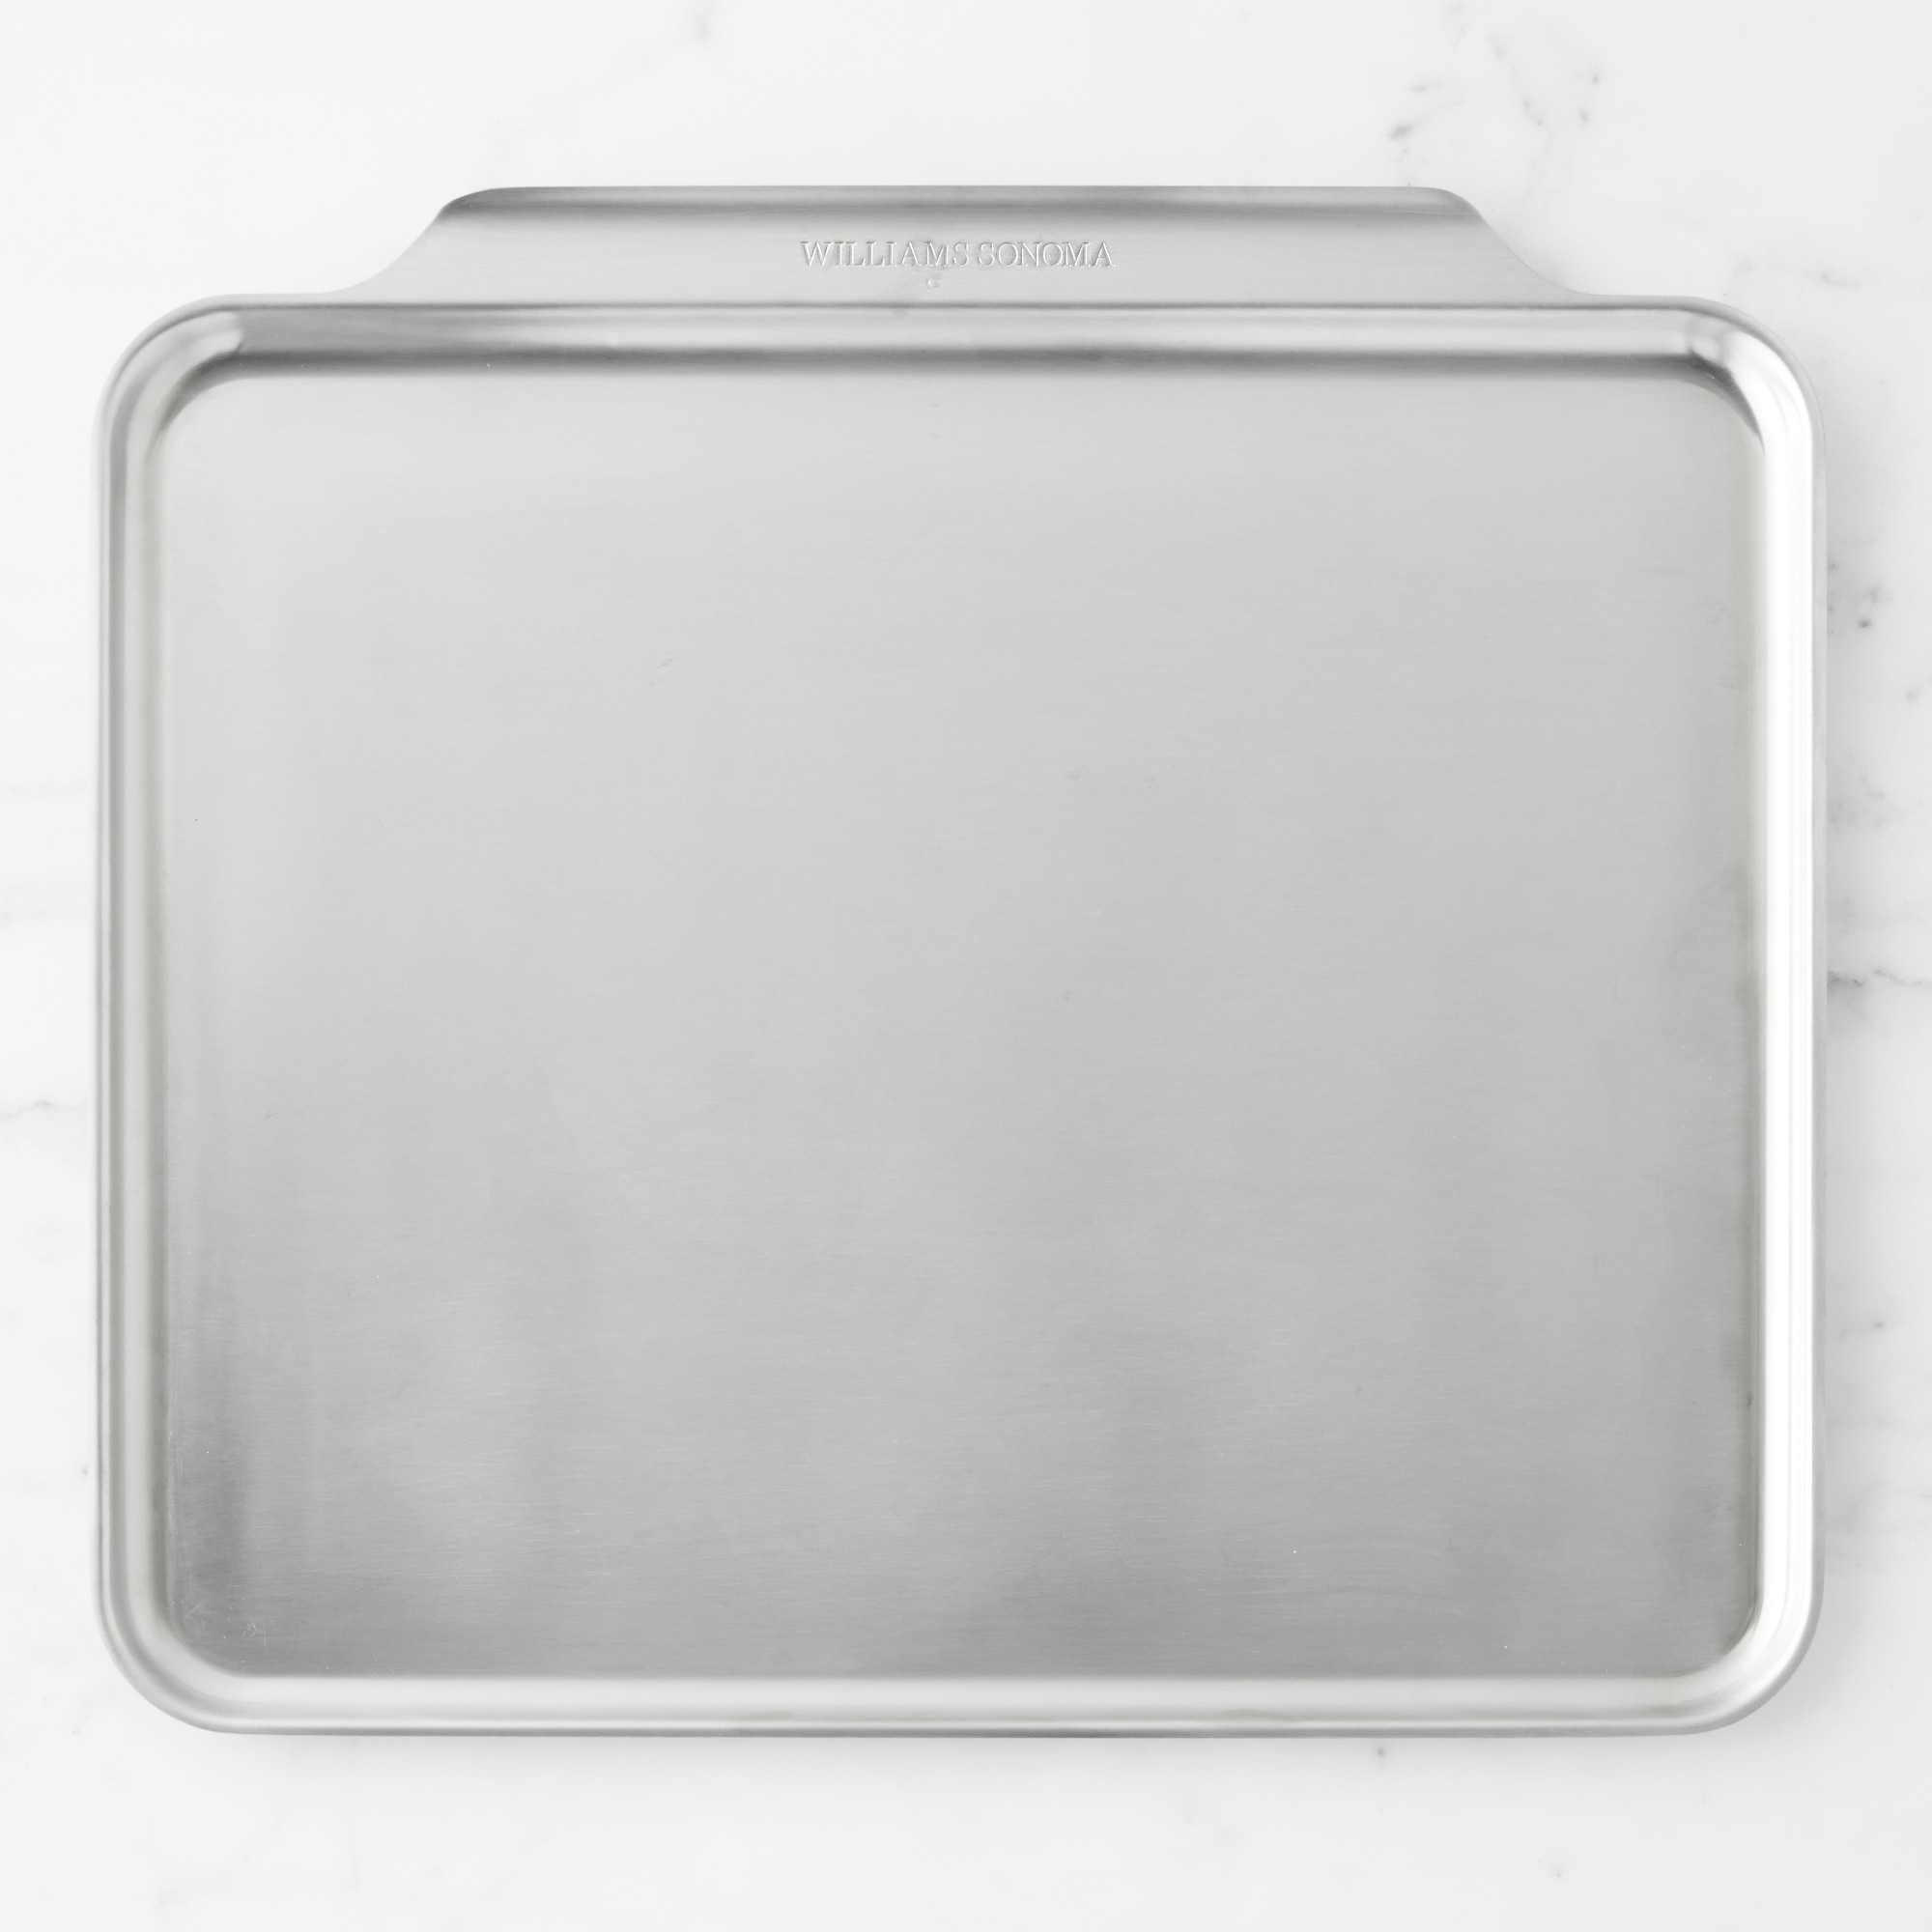 Williams Sonoma Thermo-Clad Stainless-Steel Ovenware Cookie Sheet, 14" x 17"